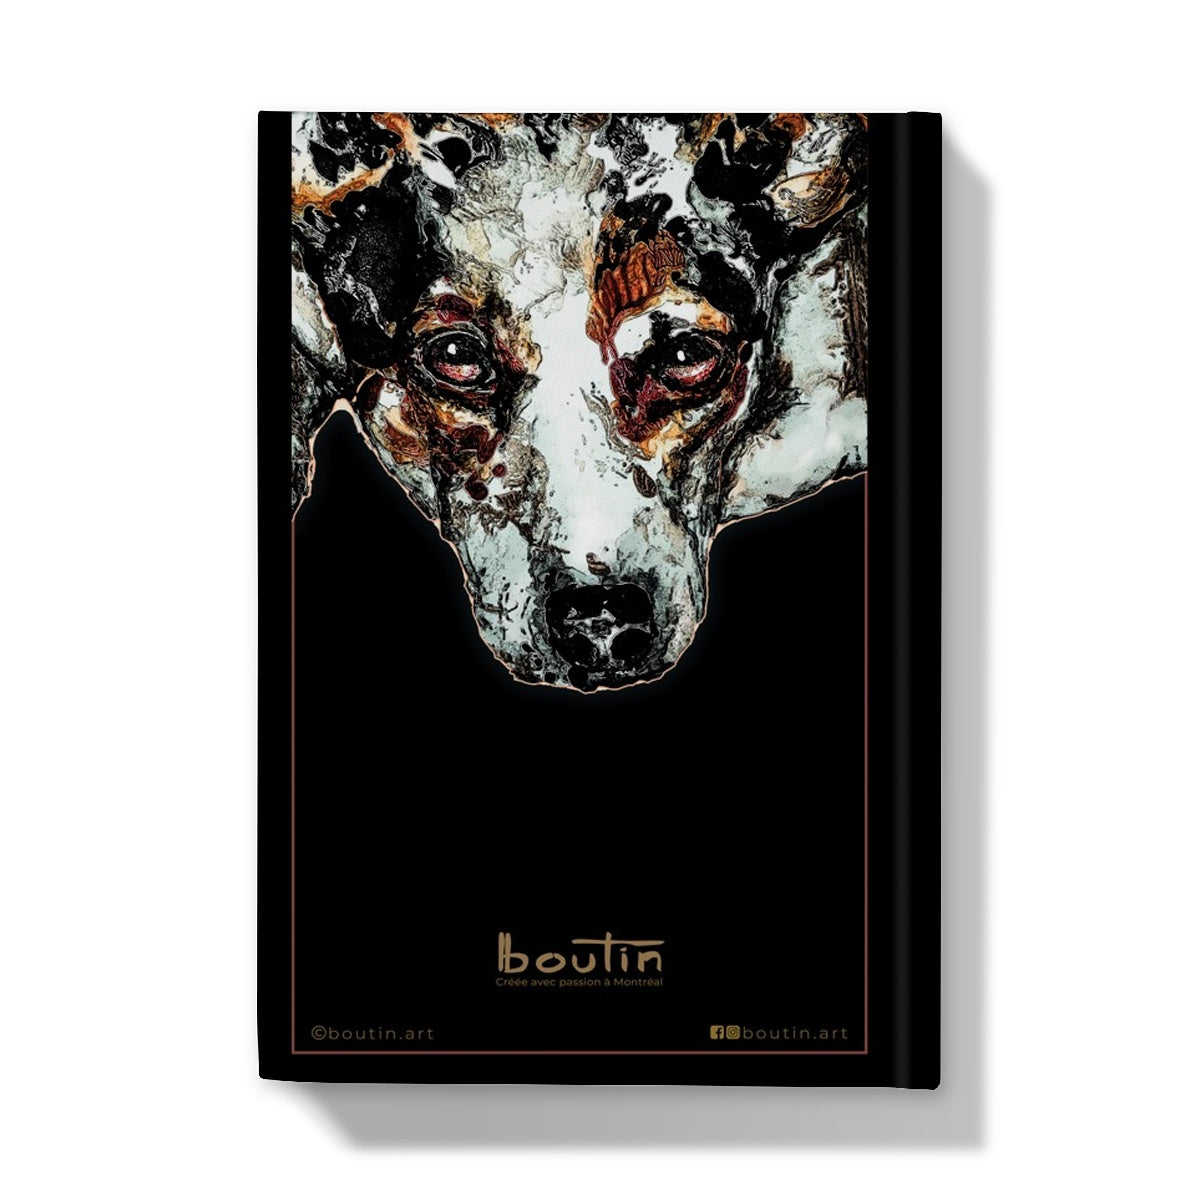 Black Russell - Notebook by the artist Boutin